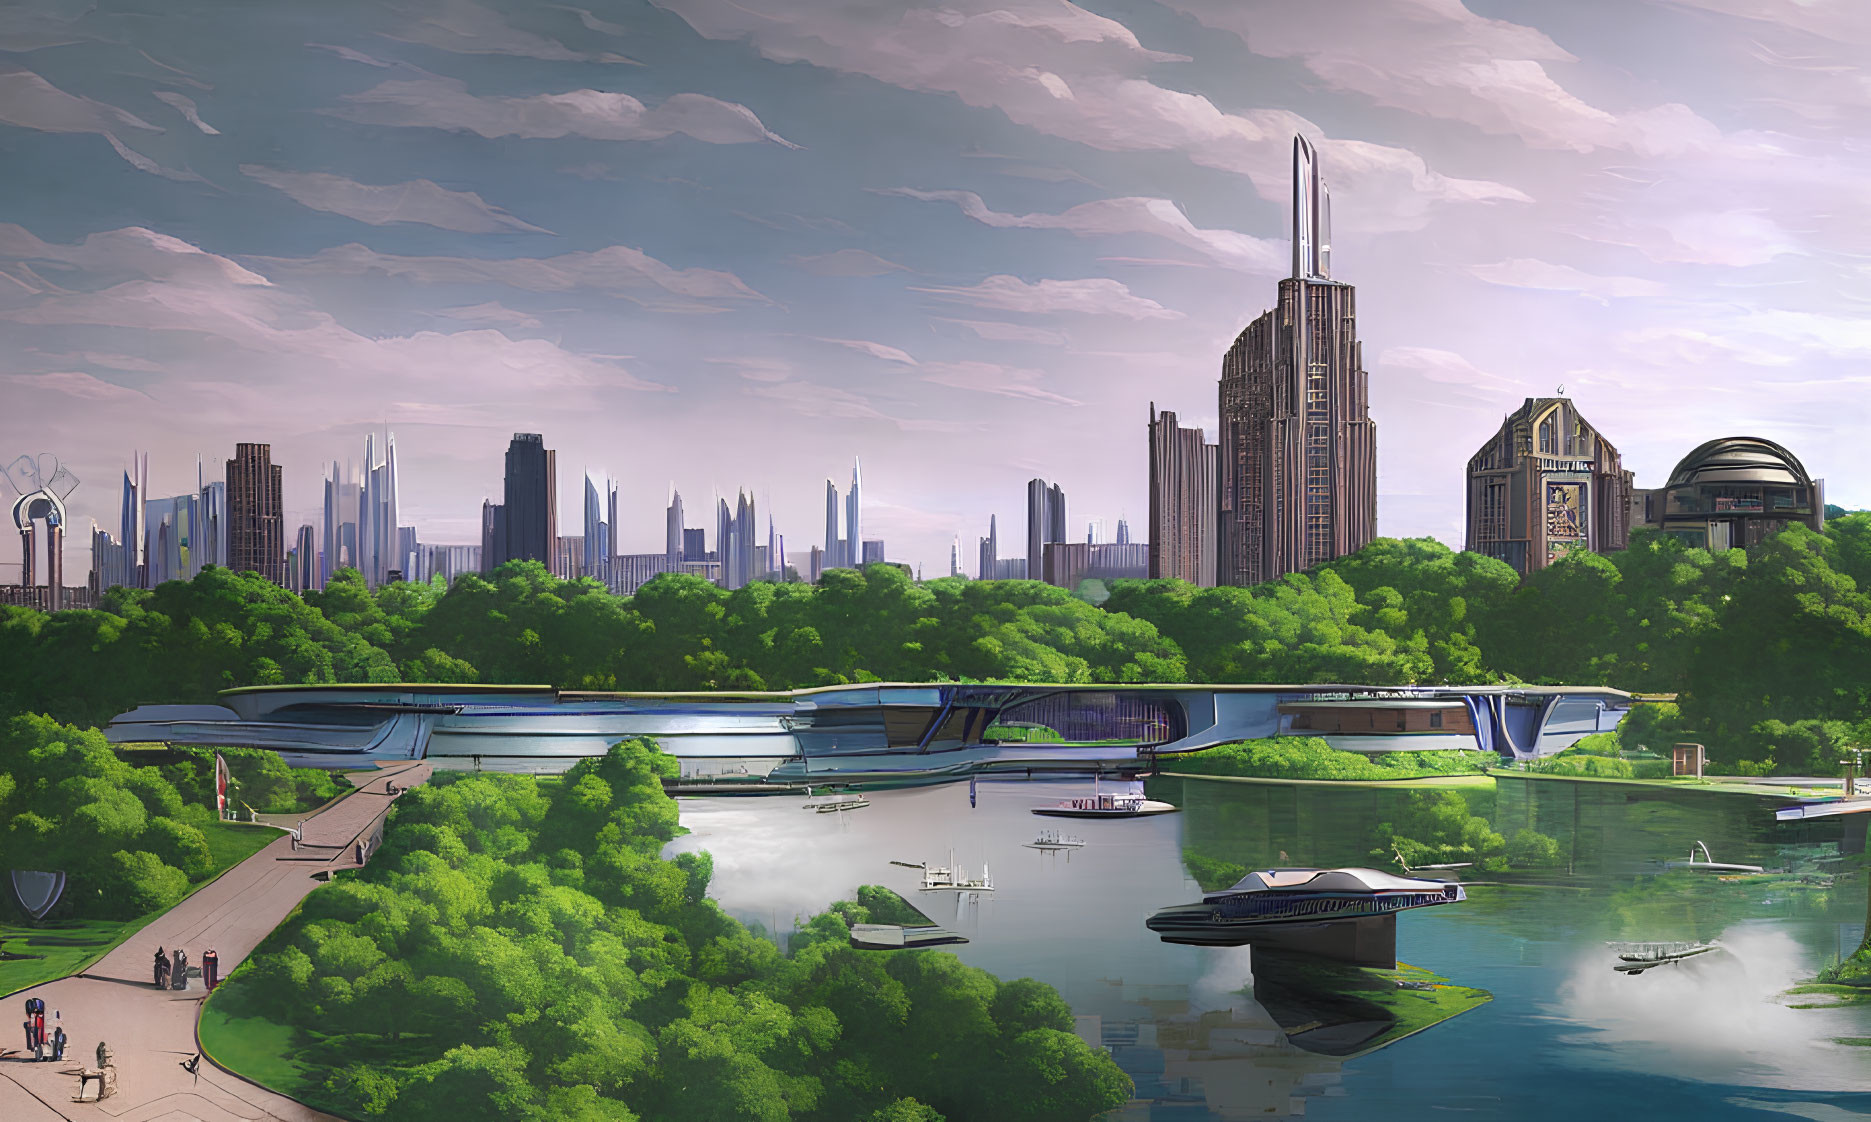 Futuristic cityscape with green park, water bodies, advanced buildings & serene atmosphere